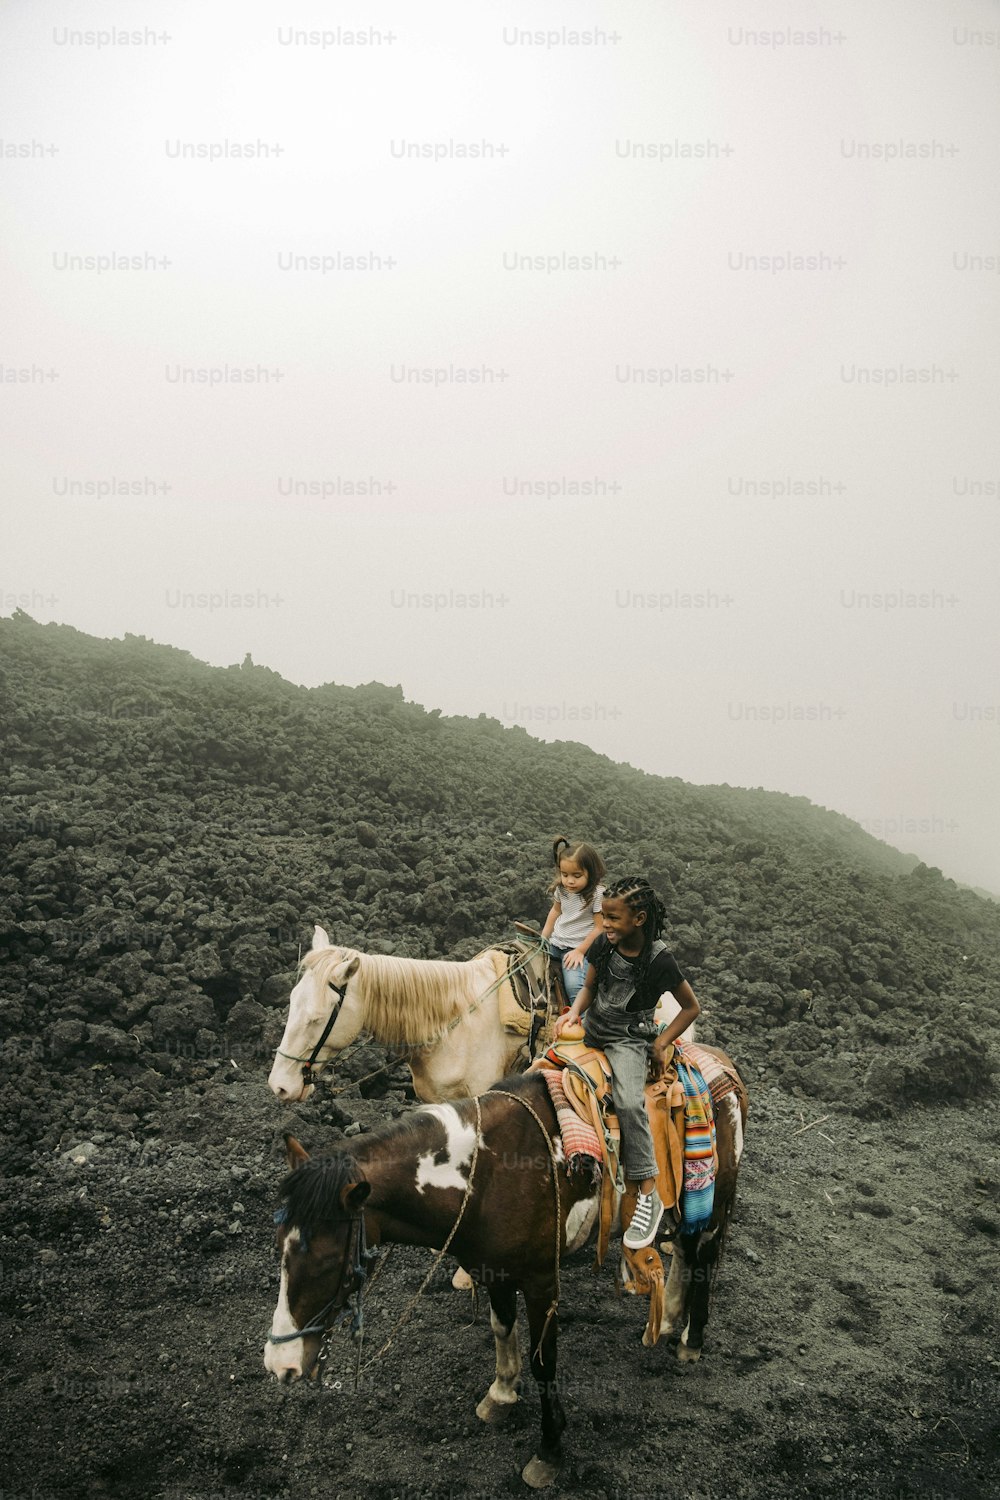 a group of people riding on the back of horses